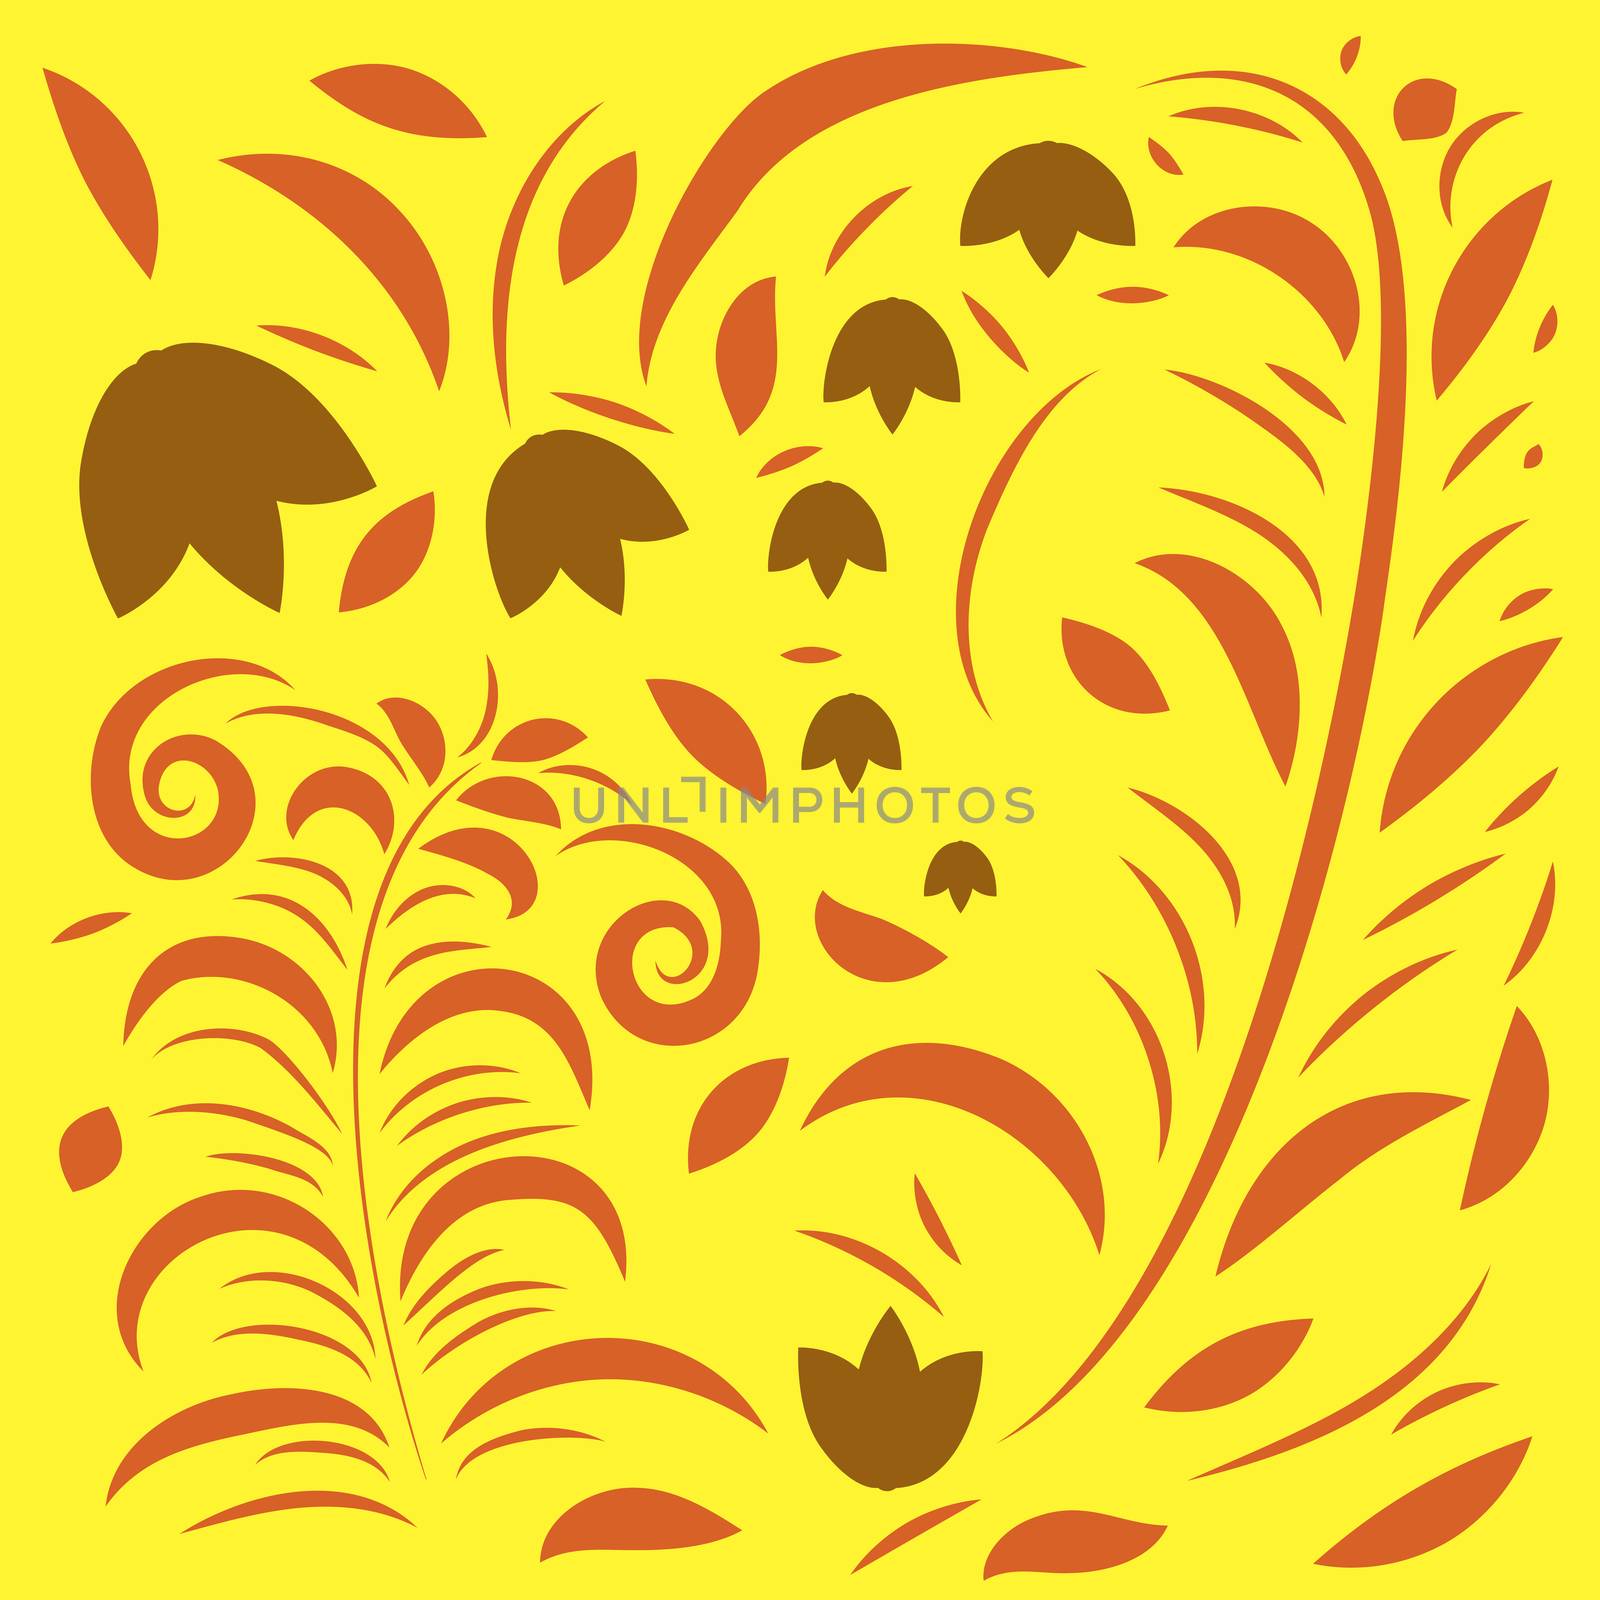 Elegant seamless pattern with yellow flowers, vector illustration